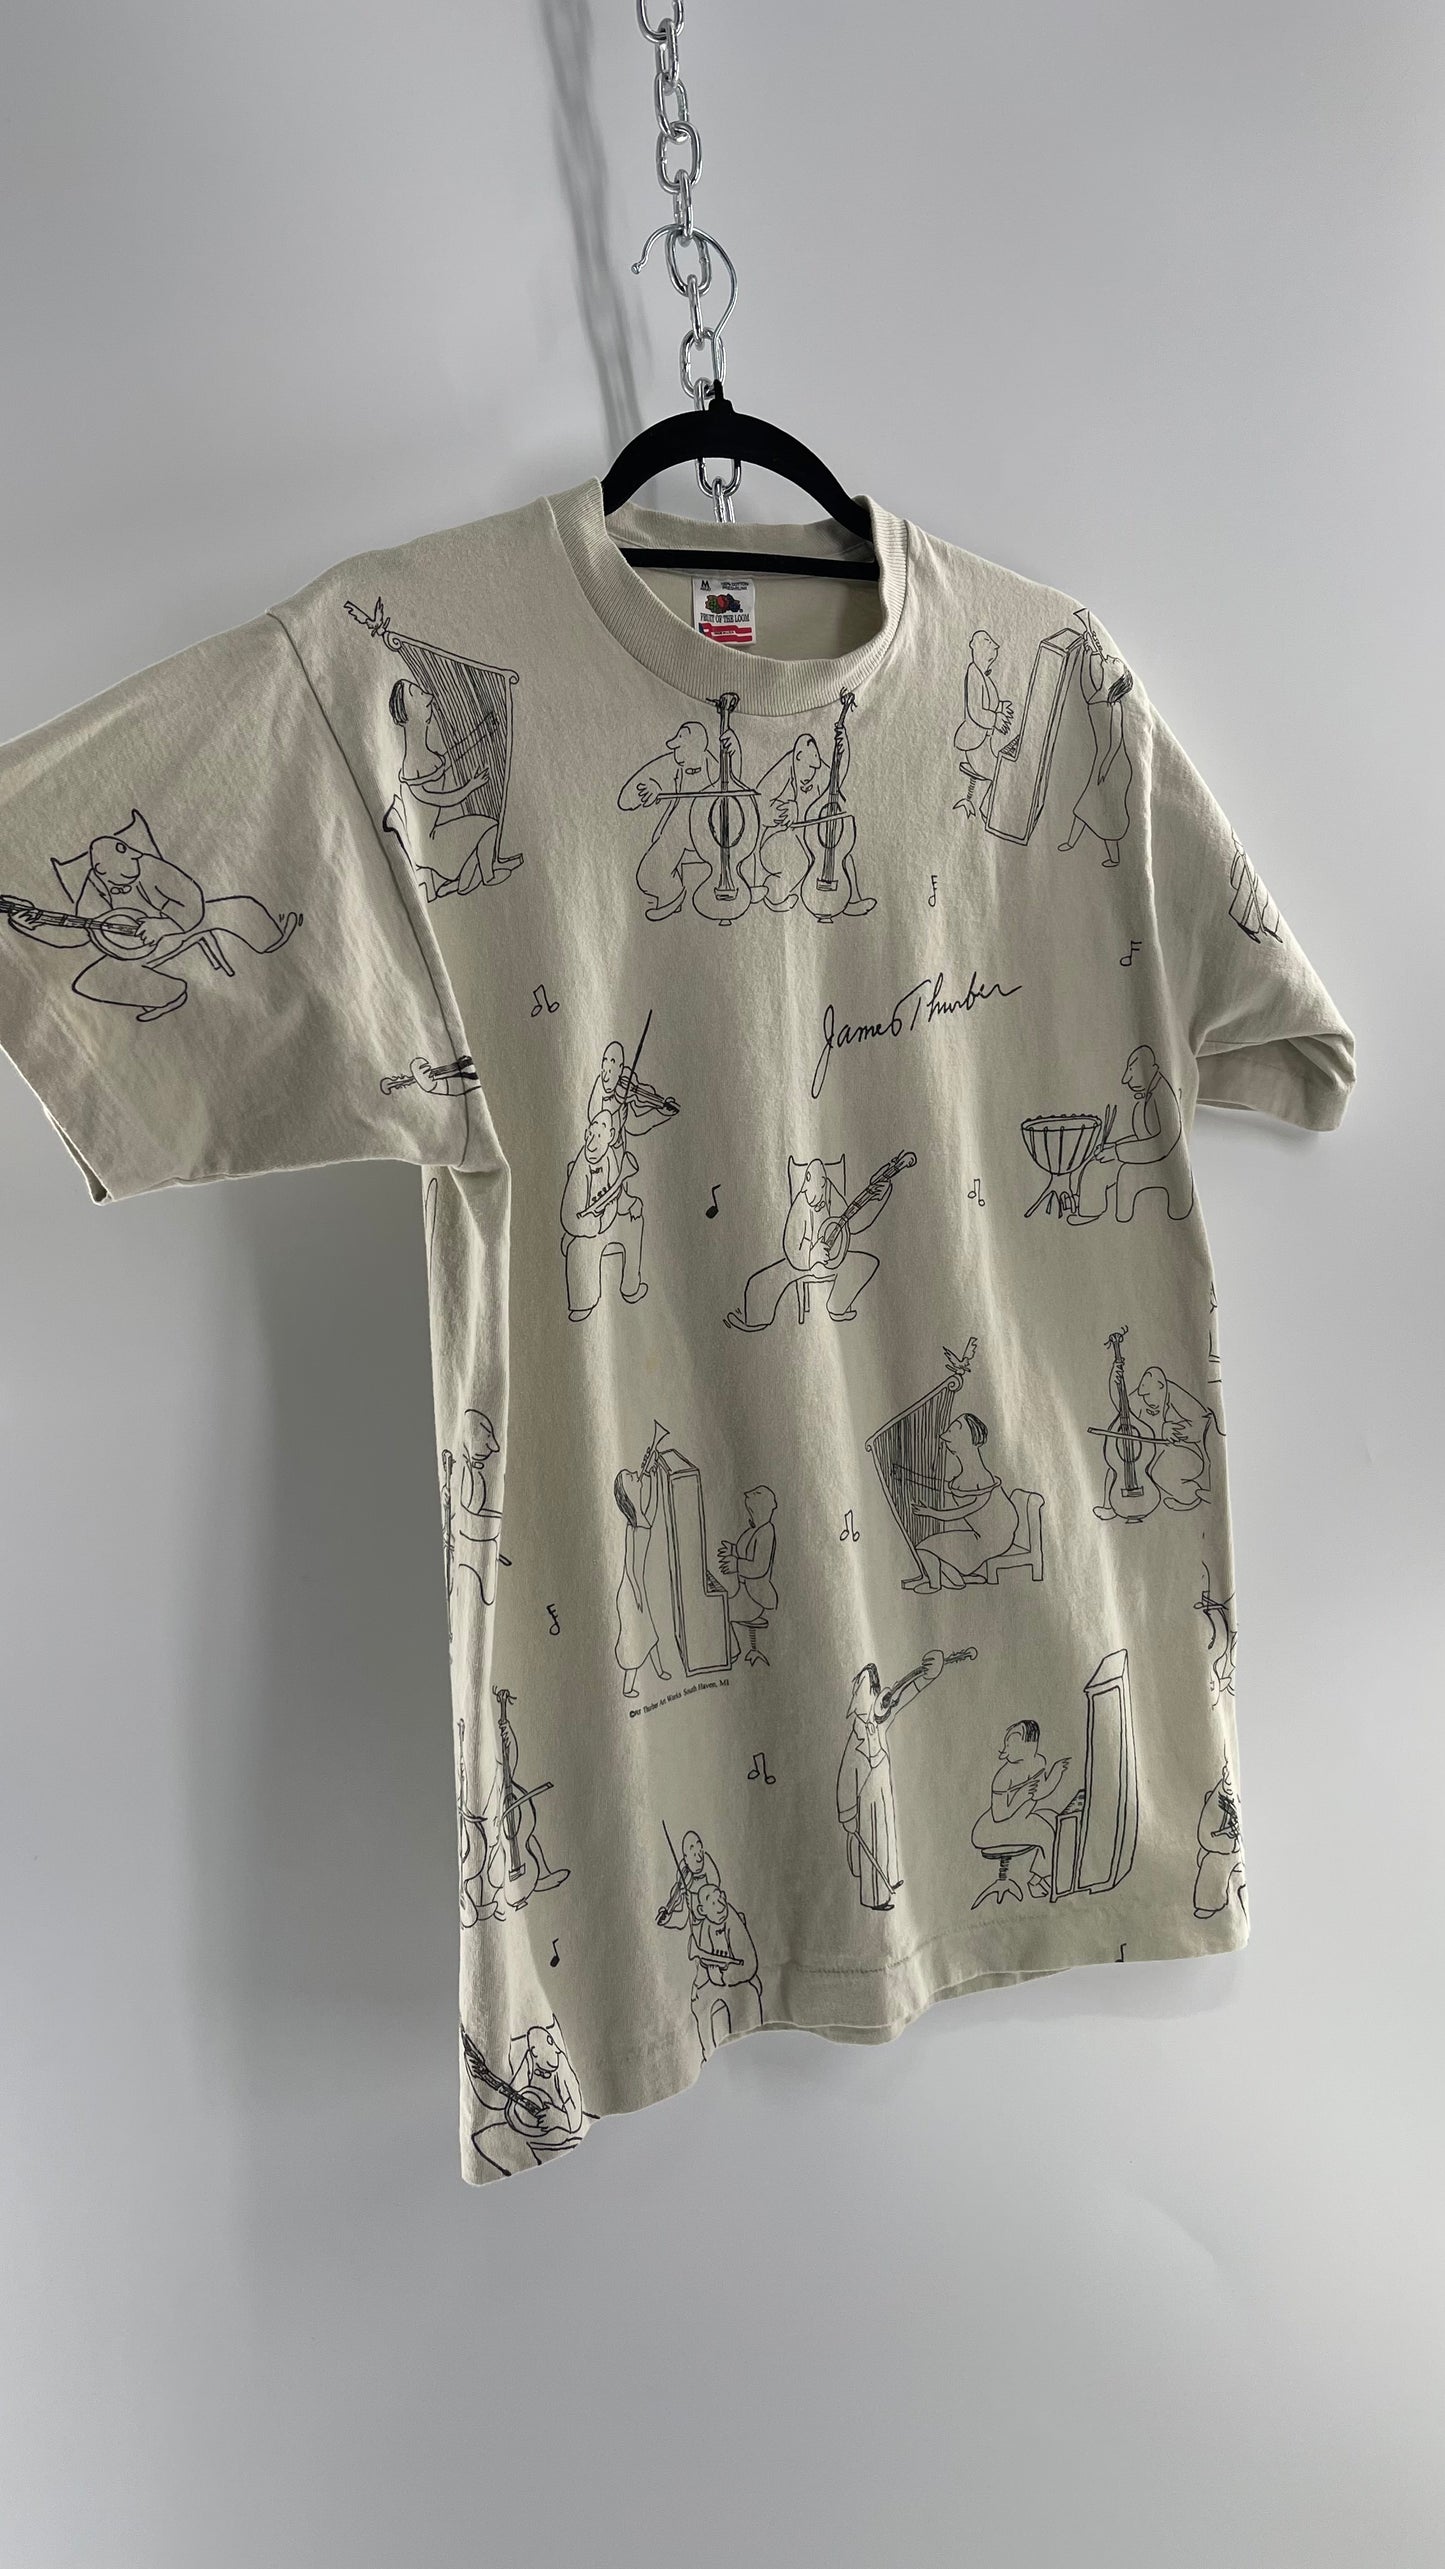 Vintage James Thurber Welcome to the Opera Beige Doodle Comic Sketch T Shirt (M)